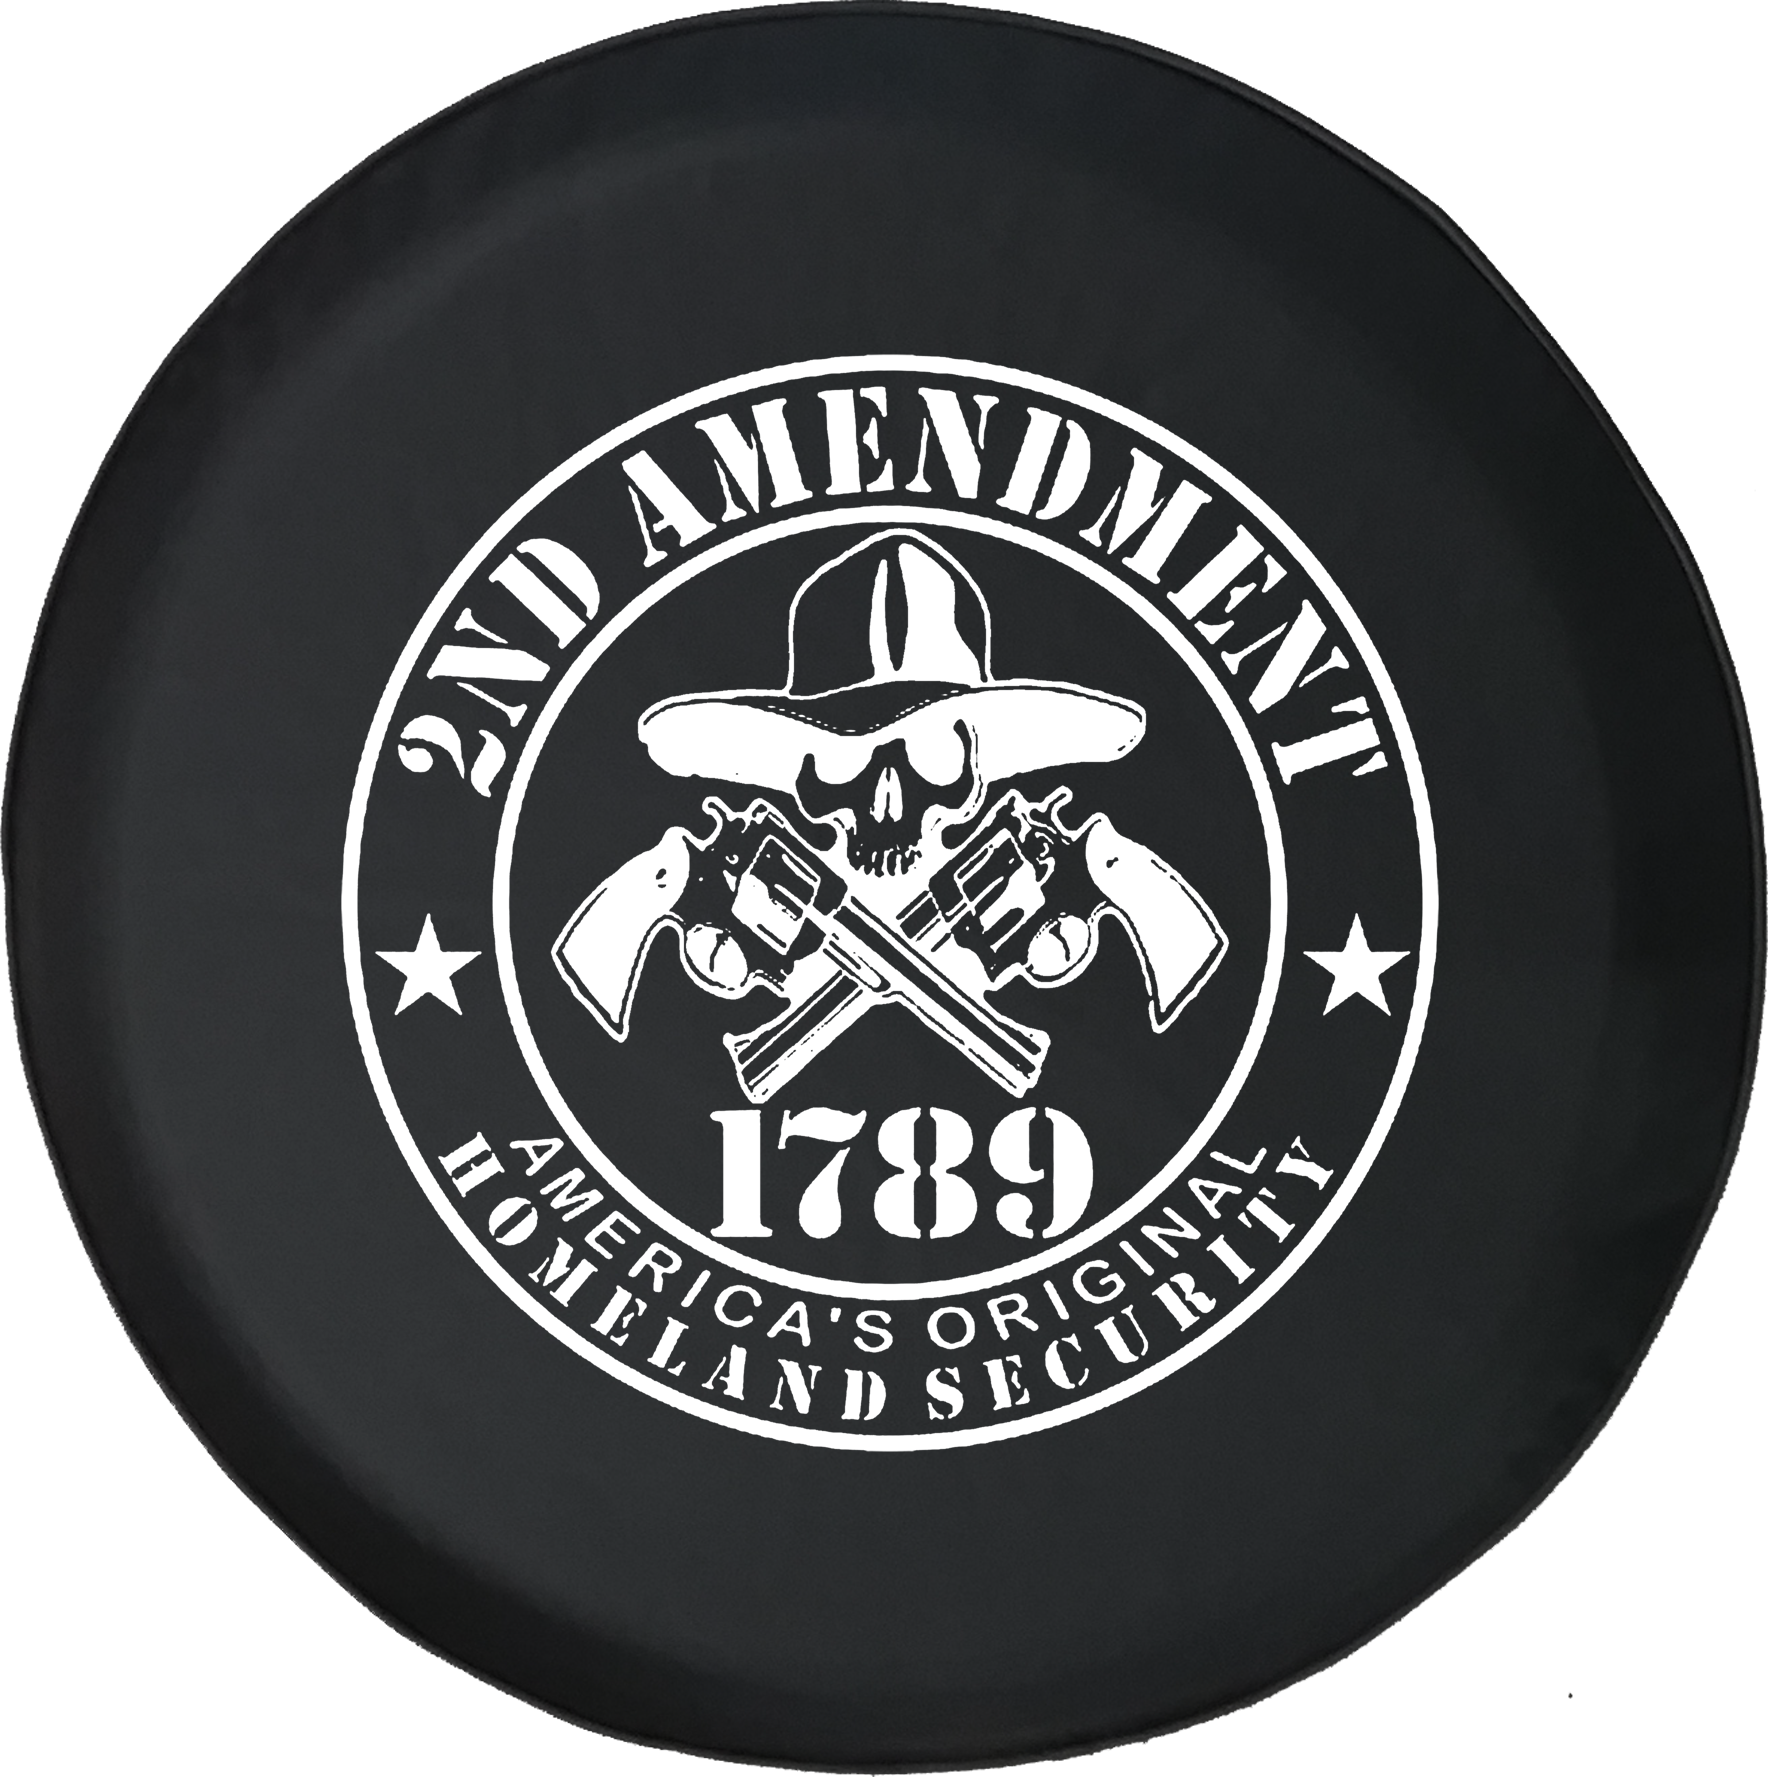 Tire Cover PRO 2nd Amendment America's Homeland SecurityOffroad Jeep RV  Camper Spare Tire Cover H384 – TireCoverPro